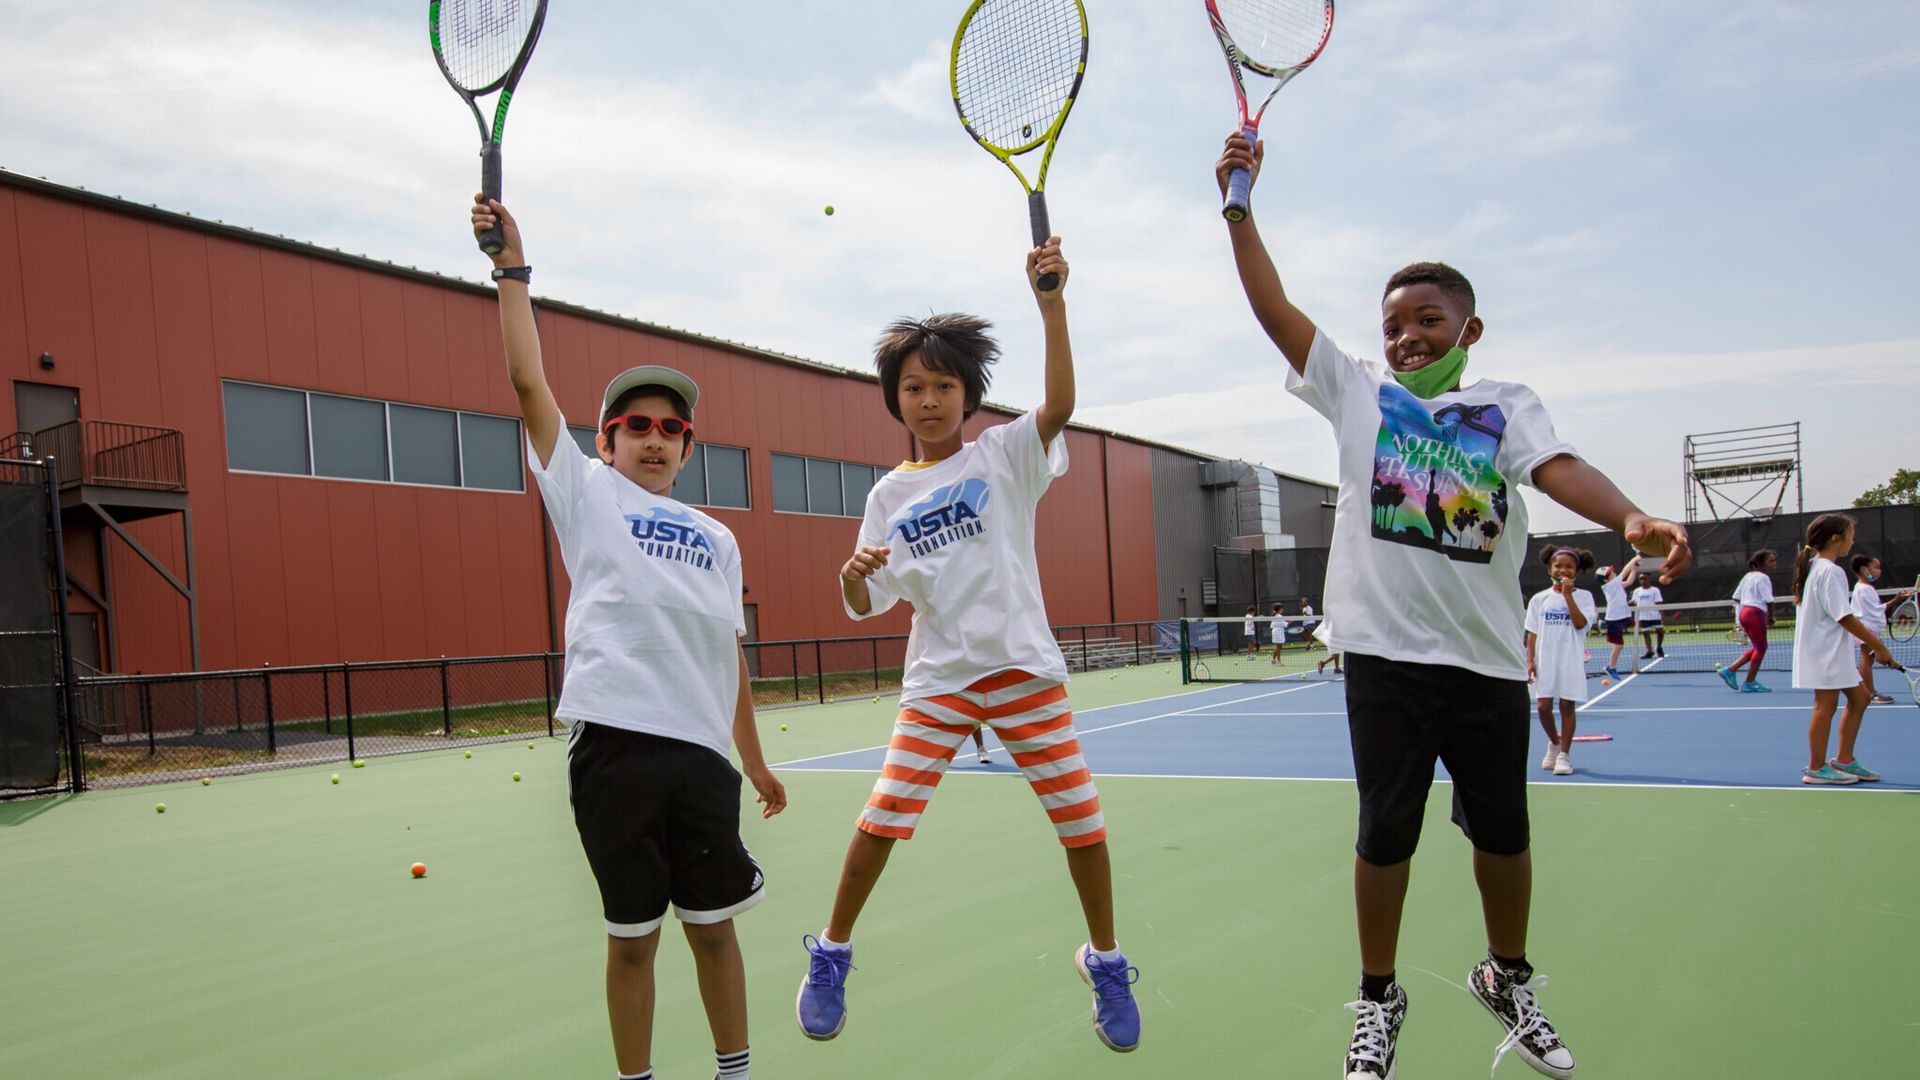 Three kids holding tennis rackets in the aid as they jump. A full tennis court of kids behind them.